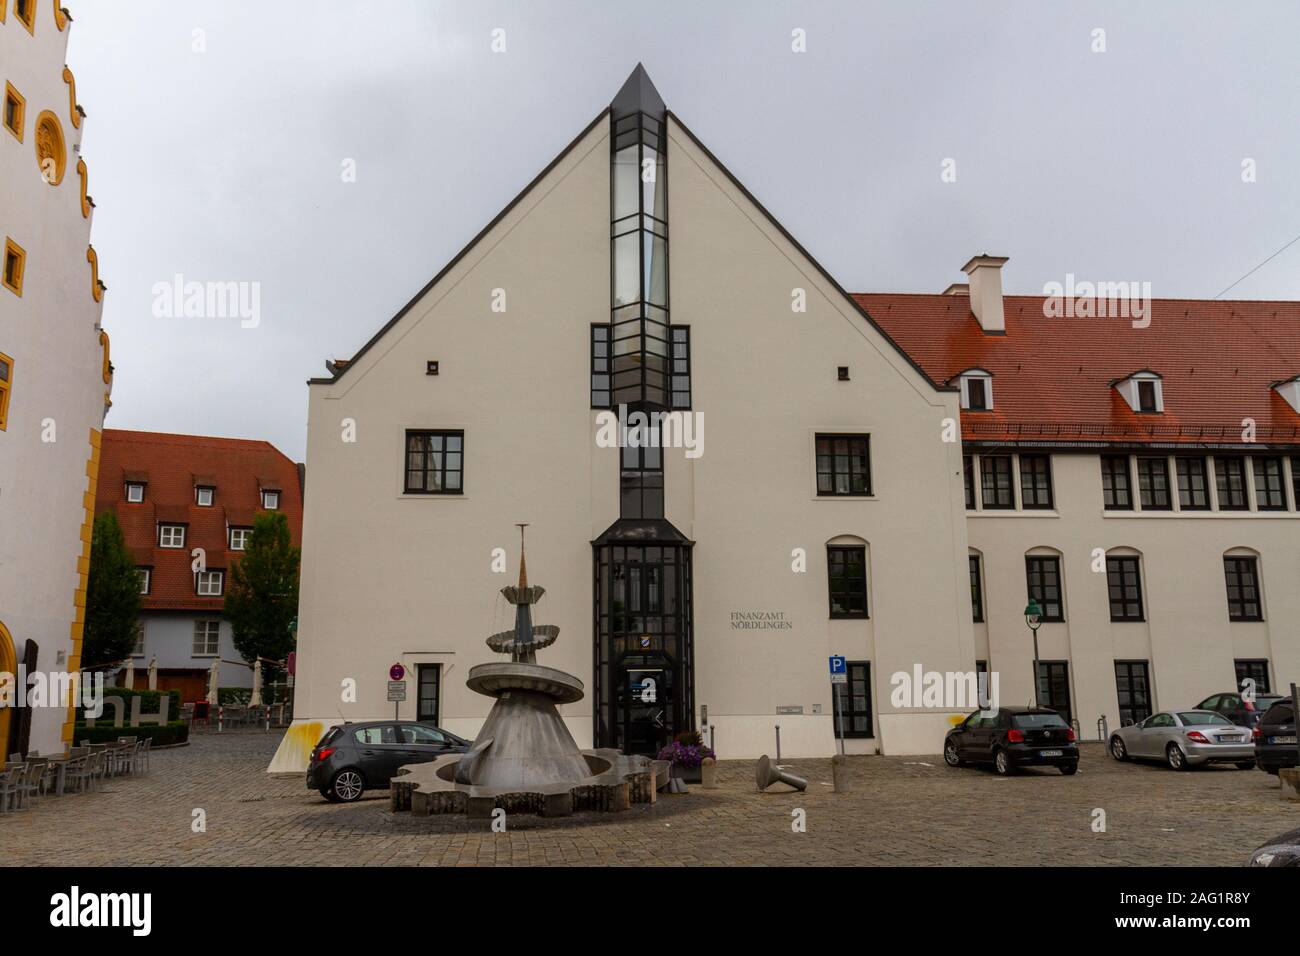 Dr. Oetker Brunnen fountain in front of the Finanzamt Nördlingen building, Bavaria, Germany. Stock Photo